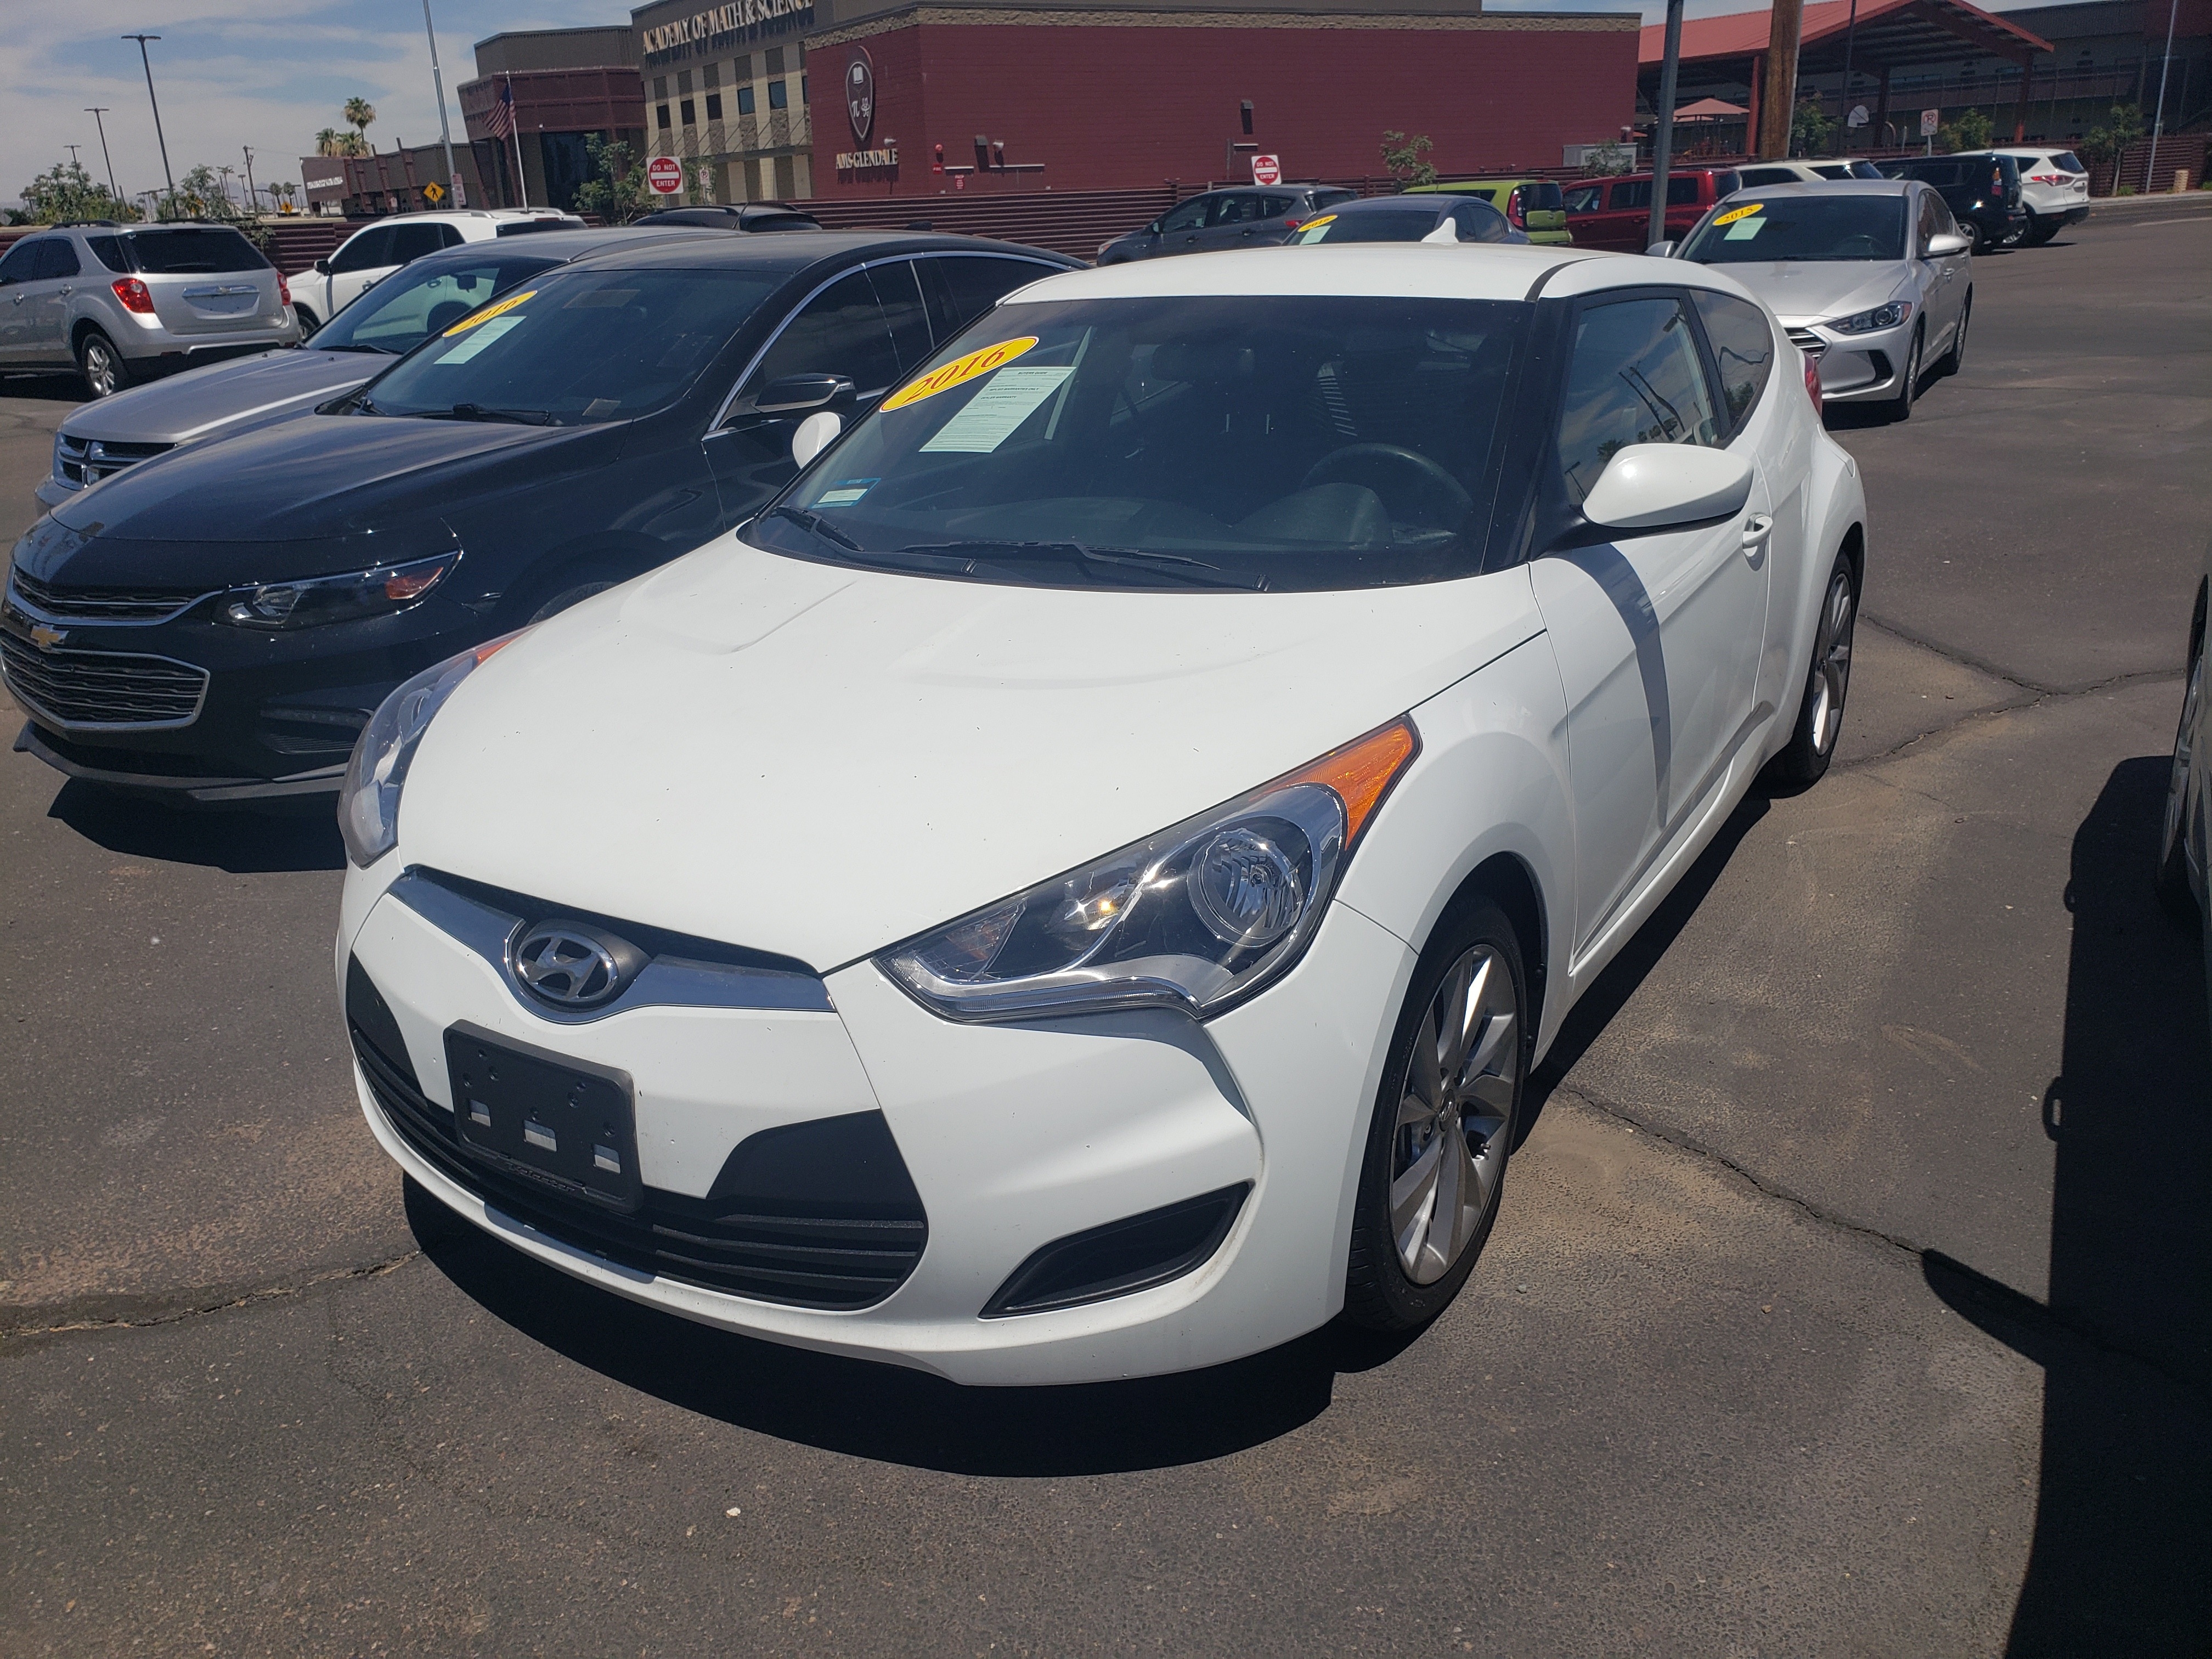 PreOwned 2016 Hyundai VELOSTER 3 DOOR COUPE 3dr Car in